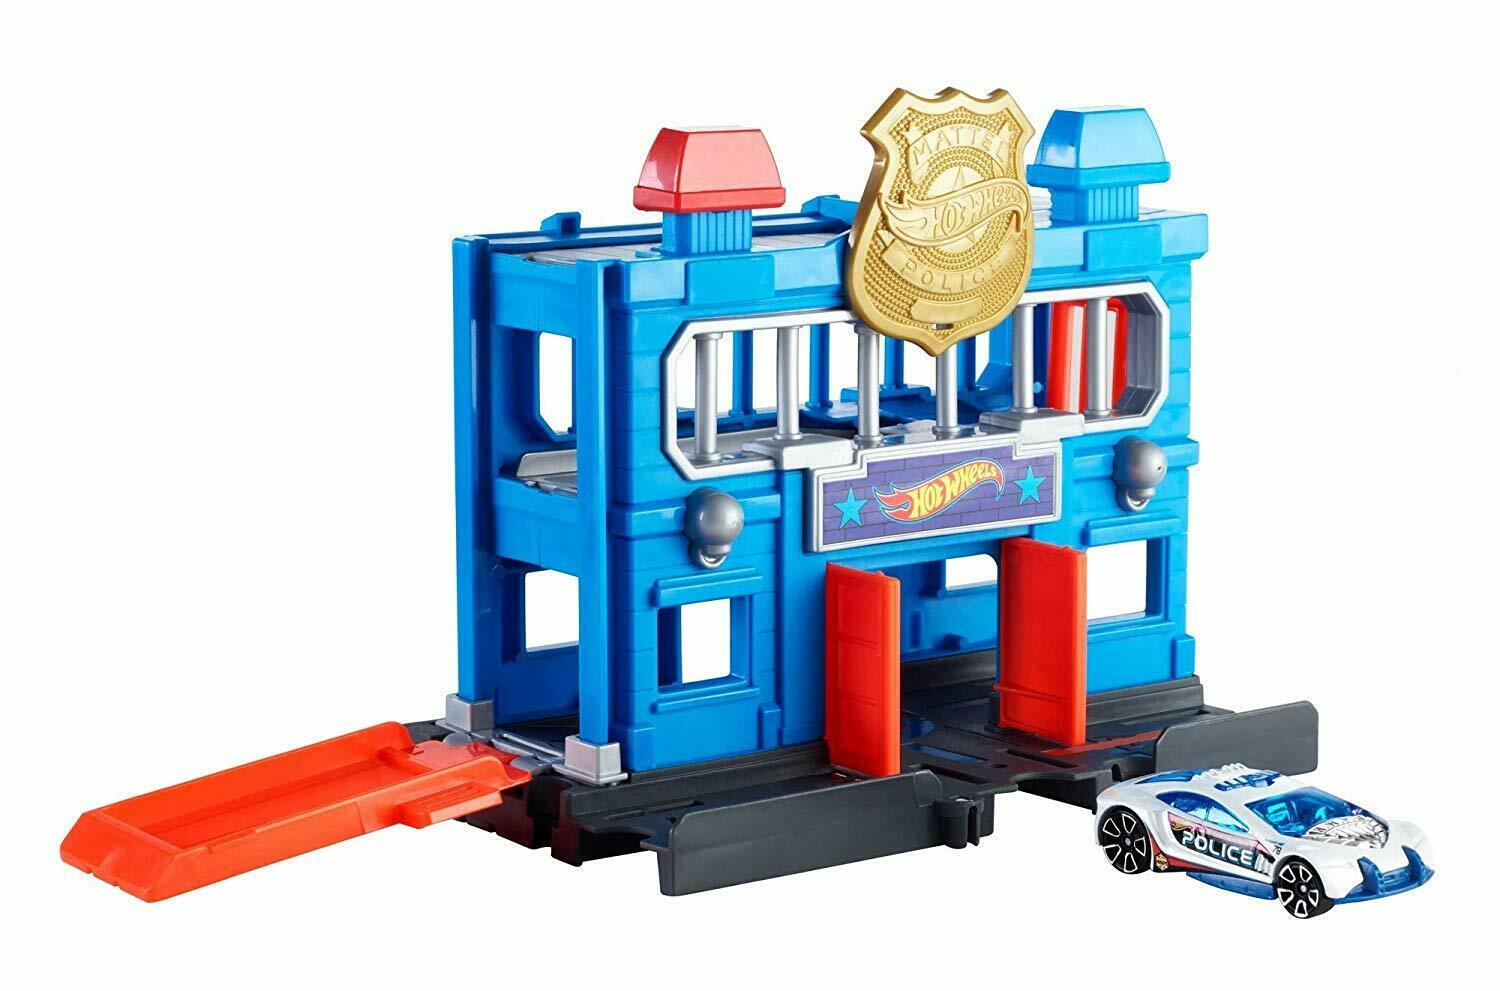 Hot Wheels City Downtown Repair Station Playset with 1 Car